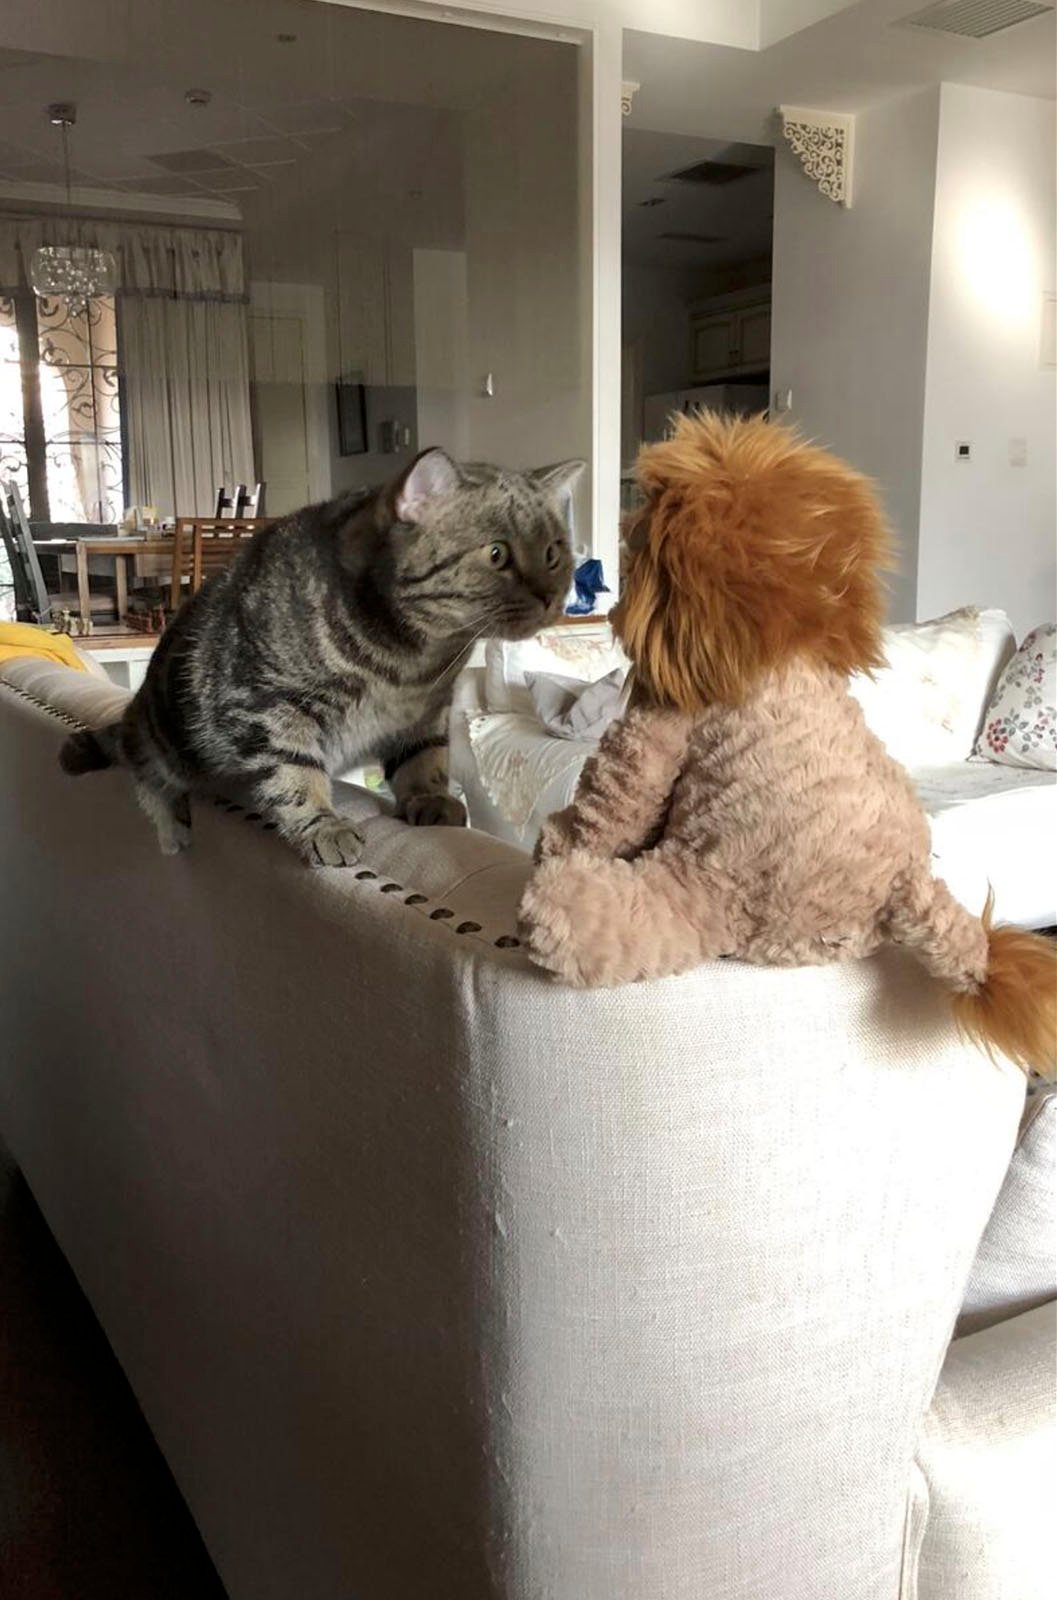 A curious tabby cat perched on a couch backrest, facing and touching noses with a fluffy brown toy dog in a well-lit living room.